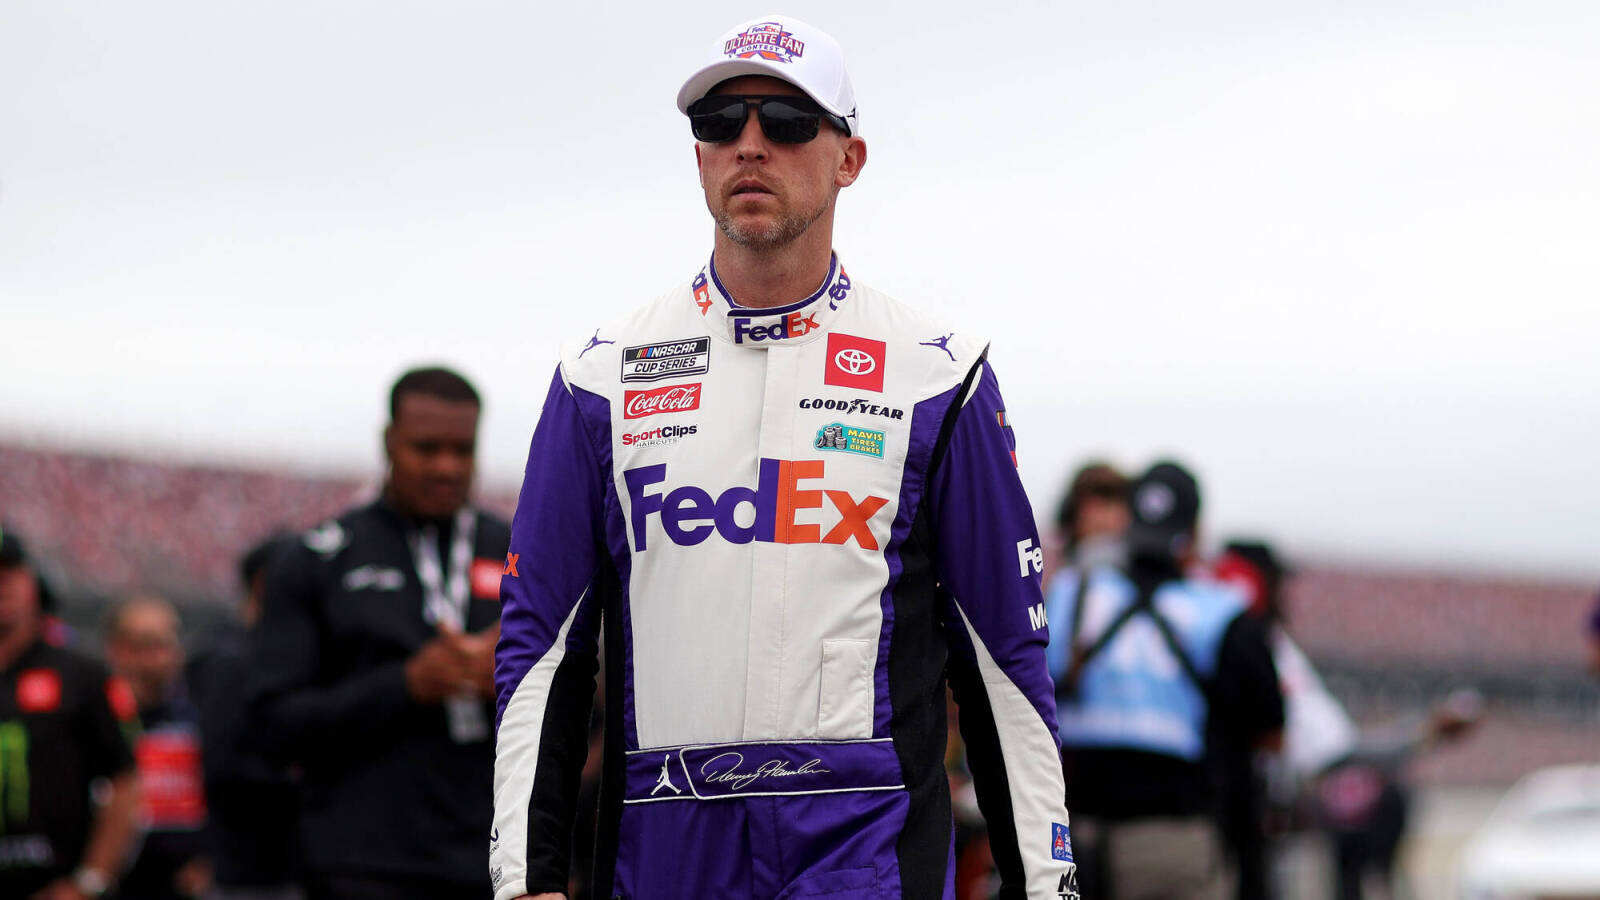 Denny Hamlin preposes making Superspeedway races 400 miles to end fuel saving strategy woes